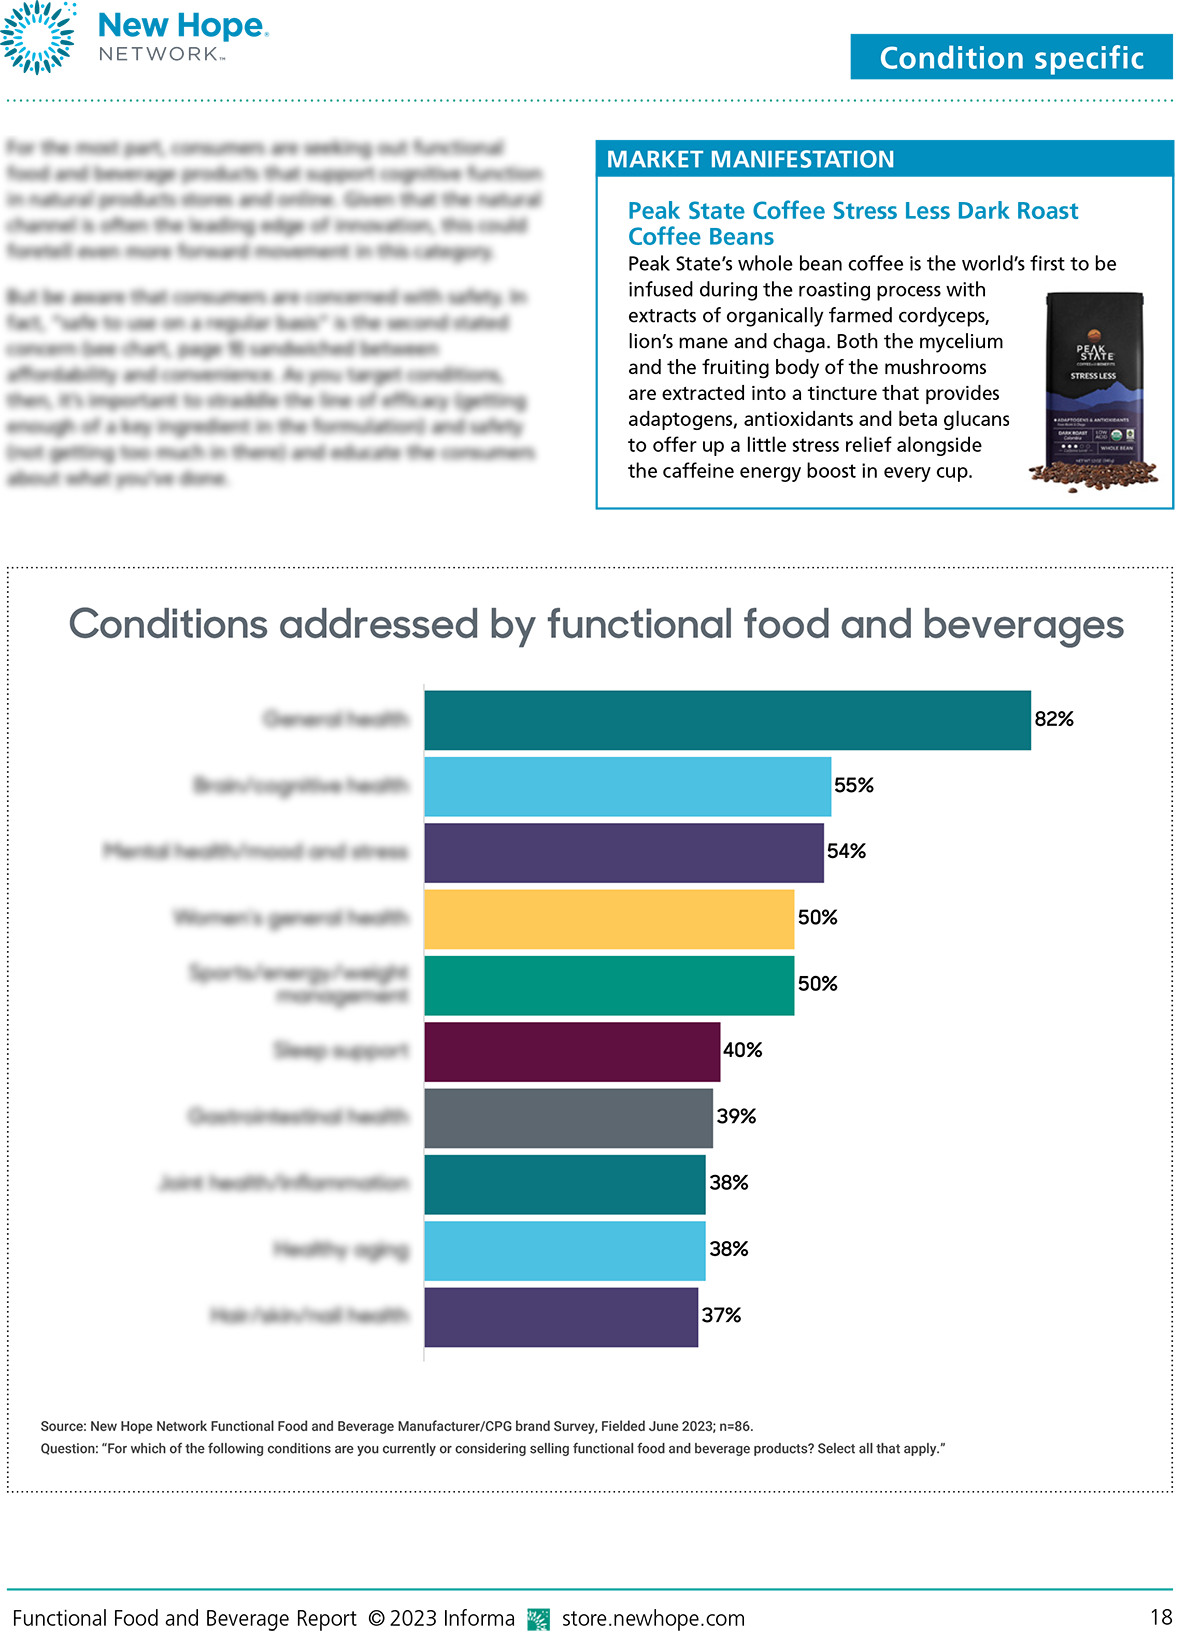 Conditions addressed by functional food and beverages